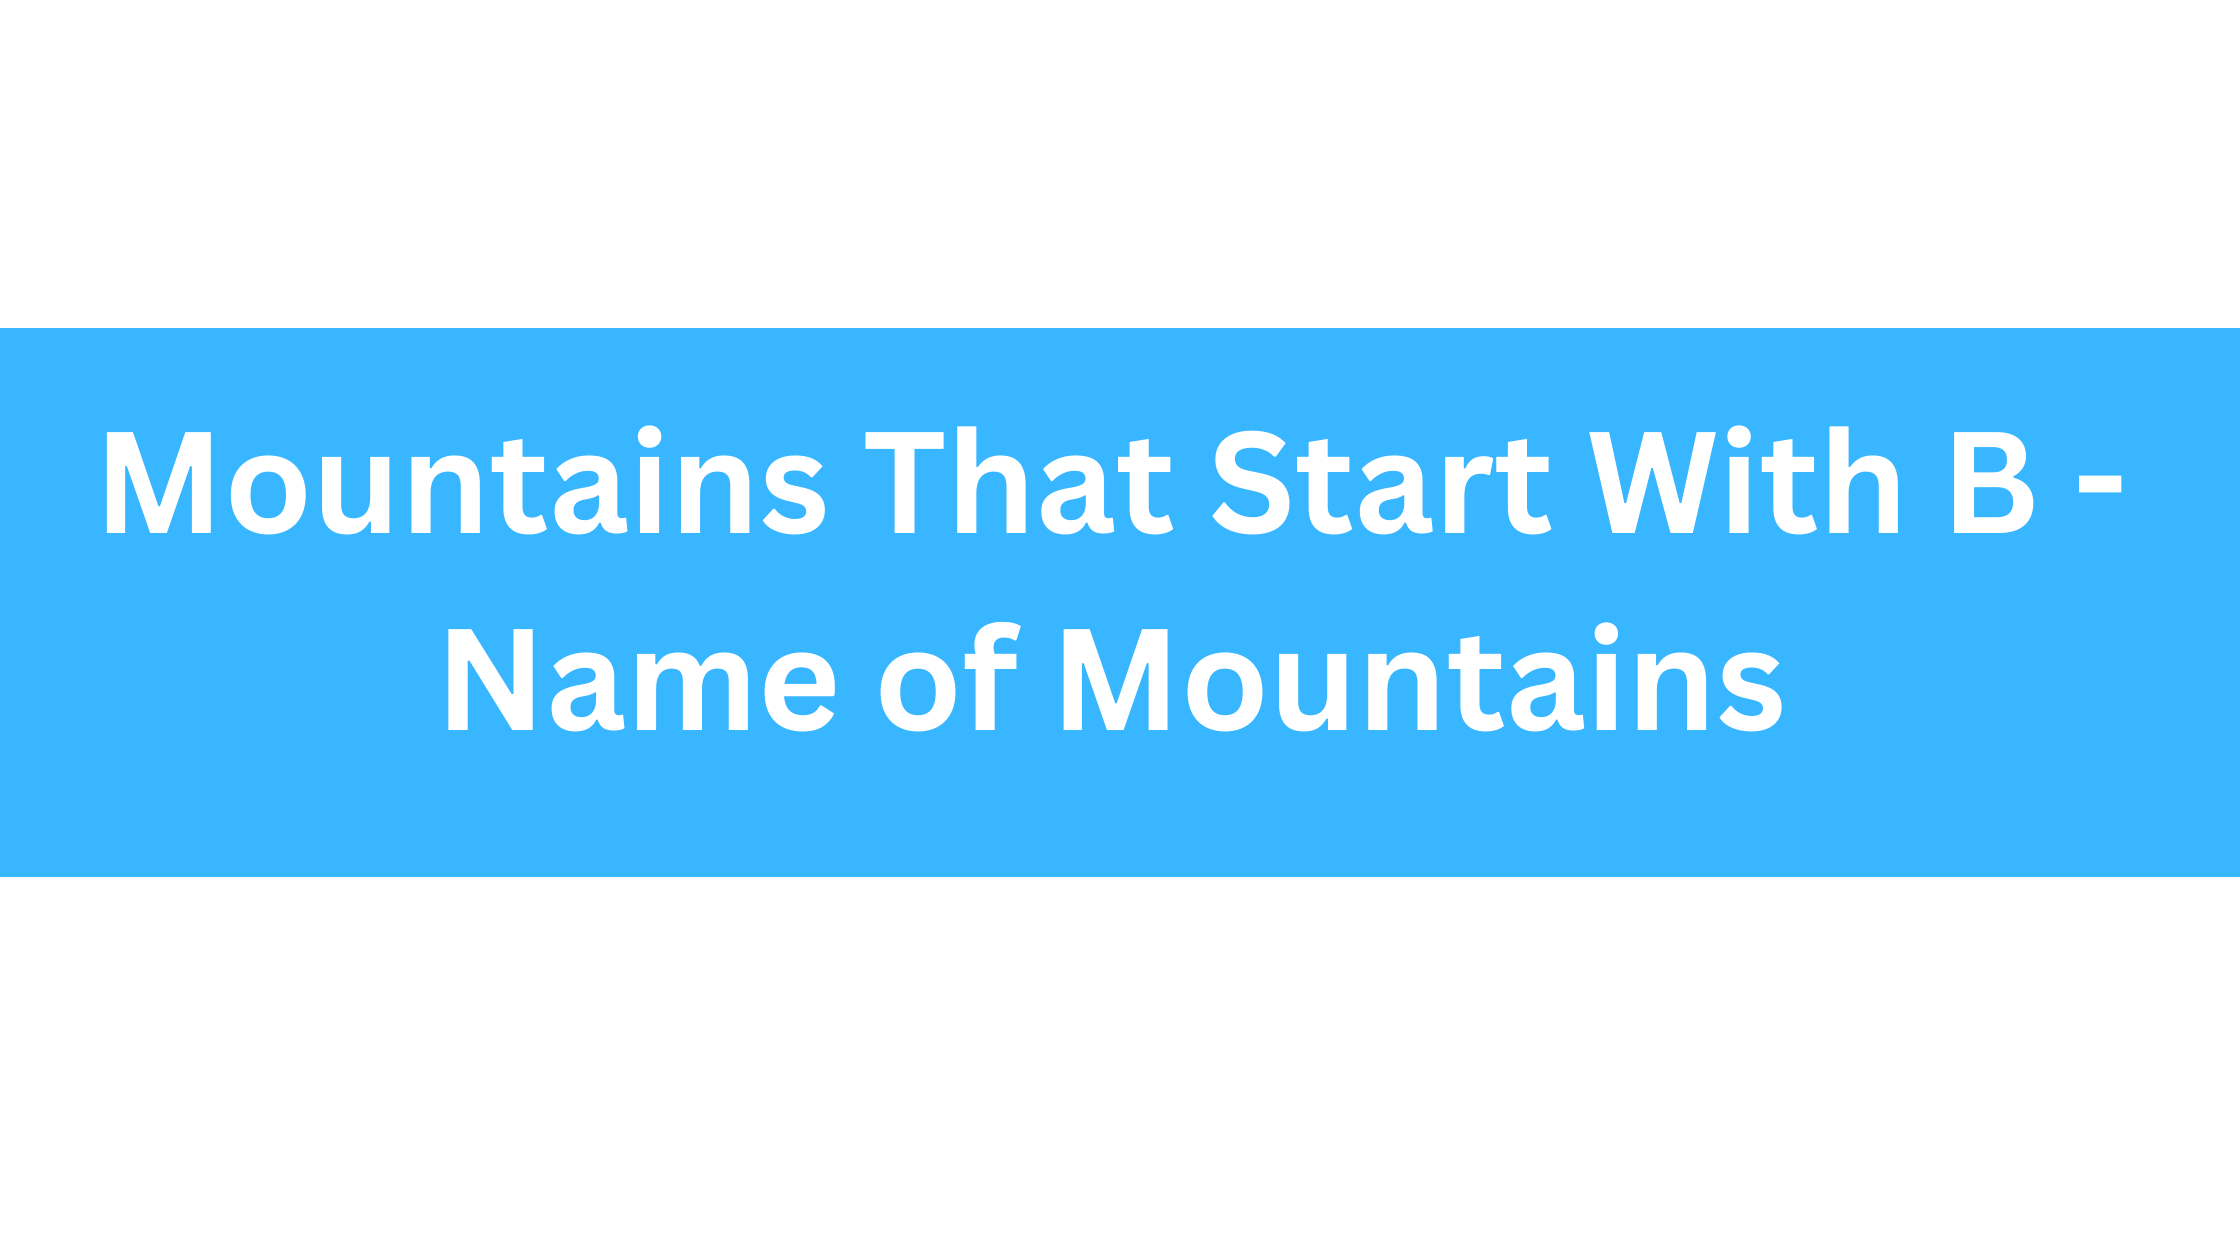 Mountains That Start With B